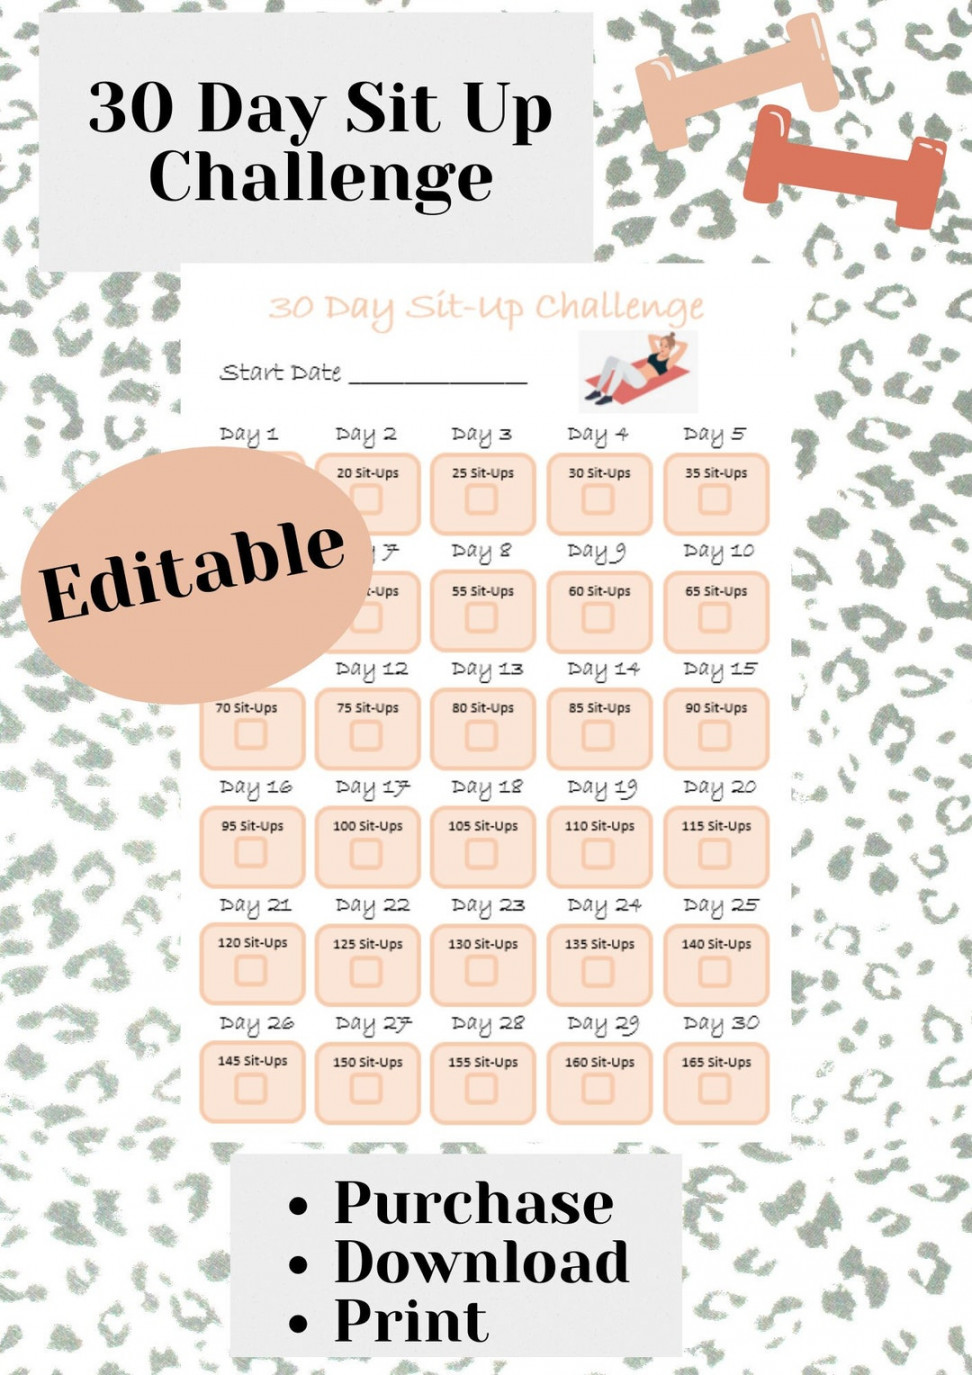 Day Sit-up Challenge Form Printable Challenge Workout - Etsy